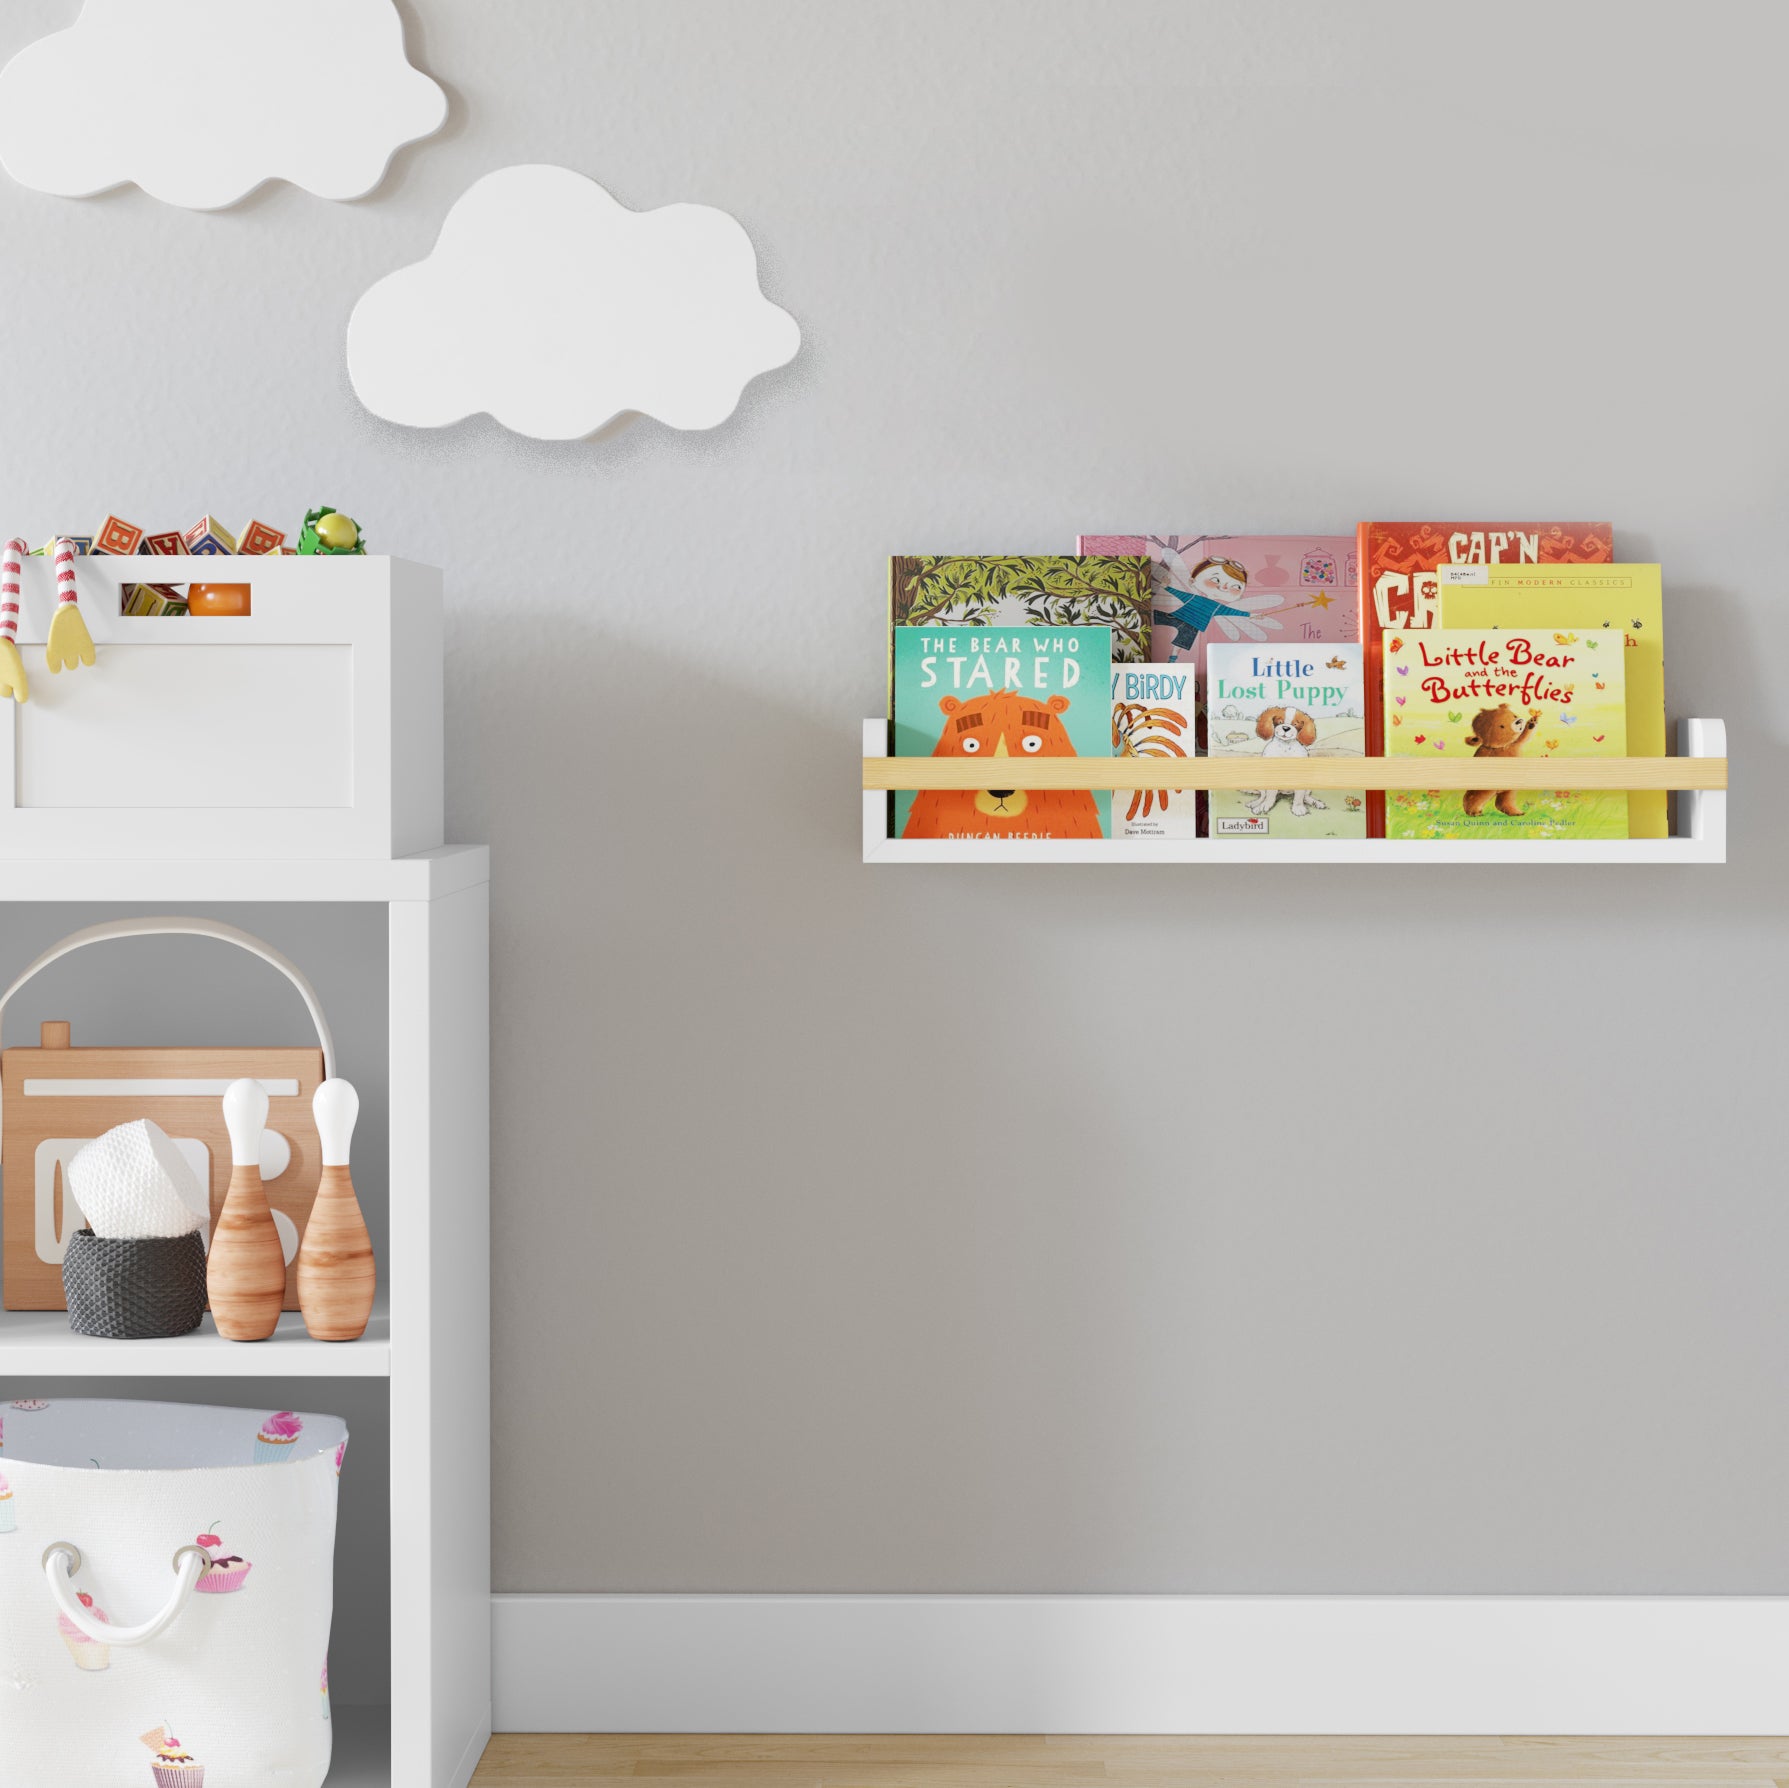 A floating nursery bookshelf holding children's books, mounted on a light gray wall with white cloud decorations. Positioned above a white shelf unit with wooden toys, creating a charming and tidy kids' space.